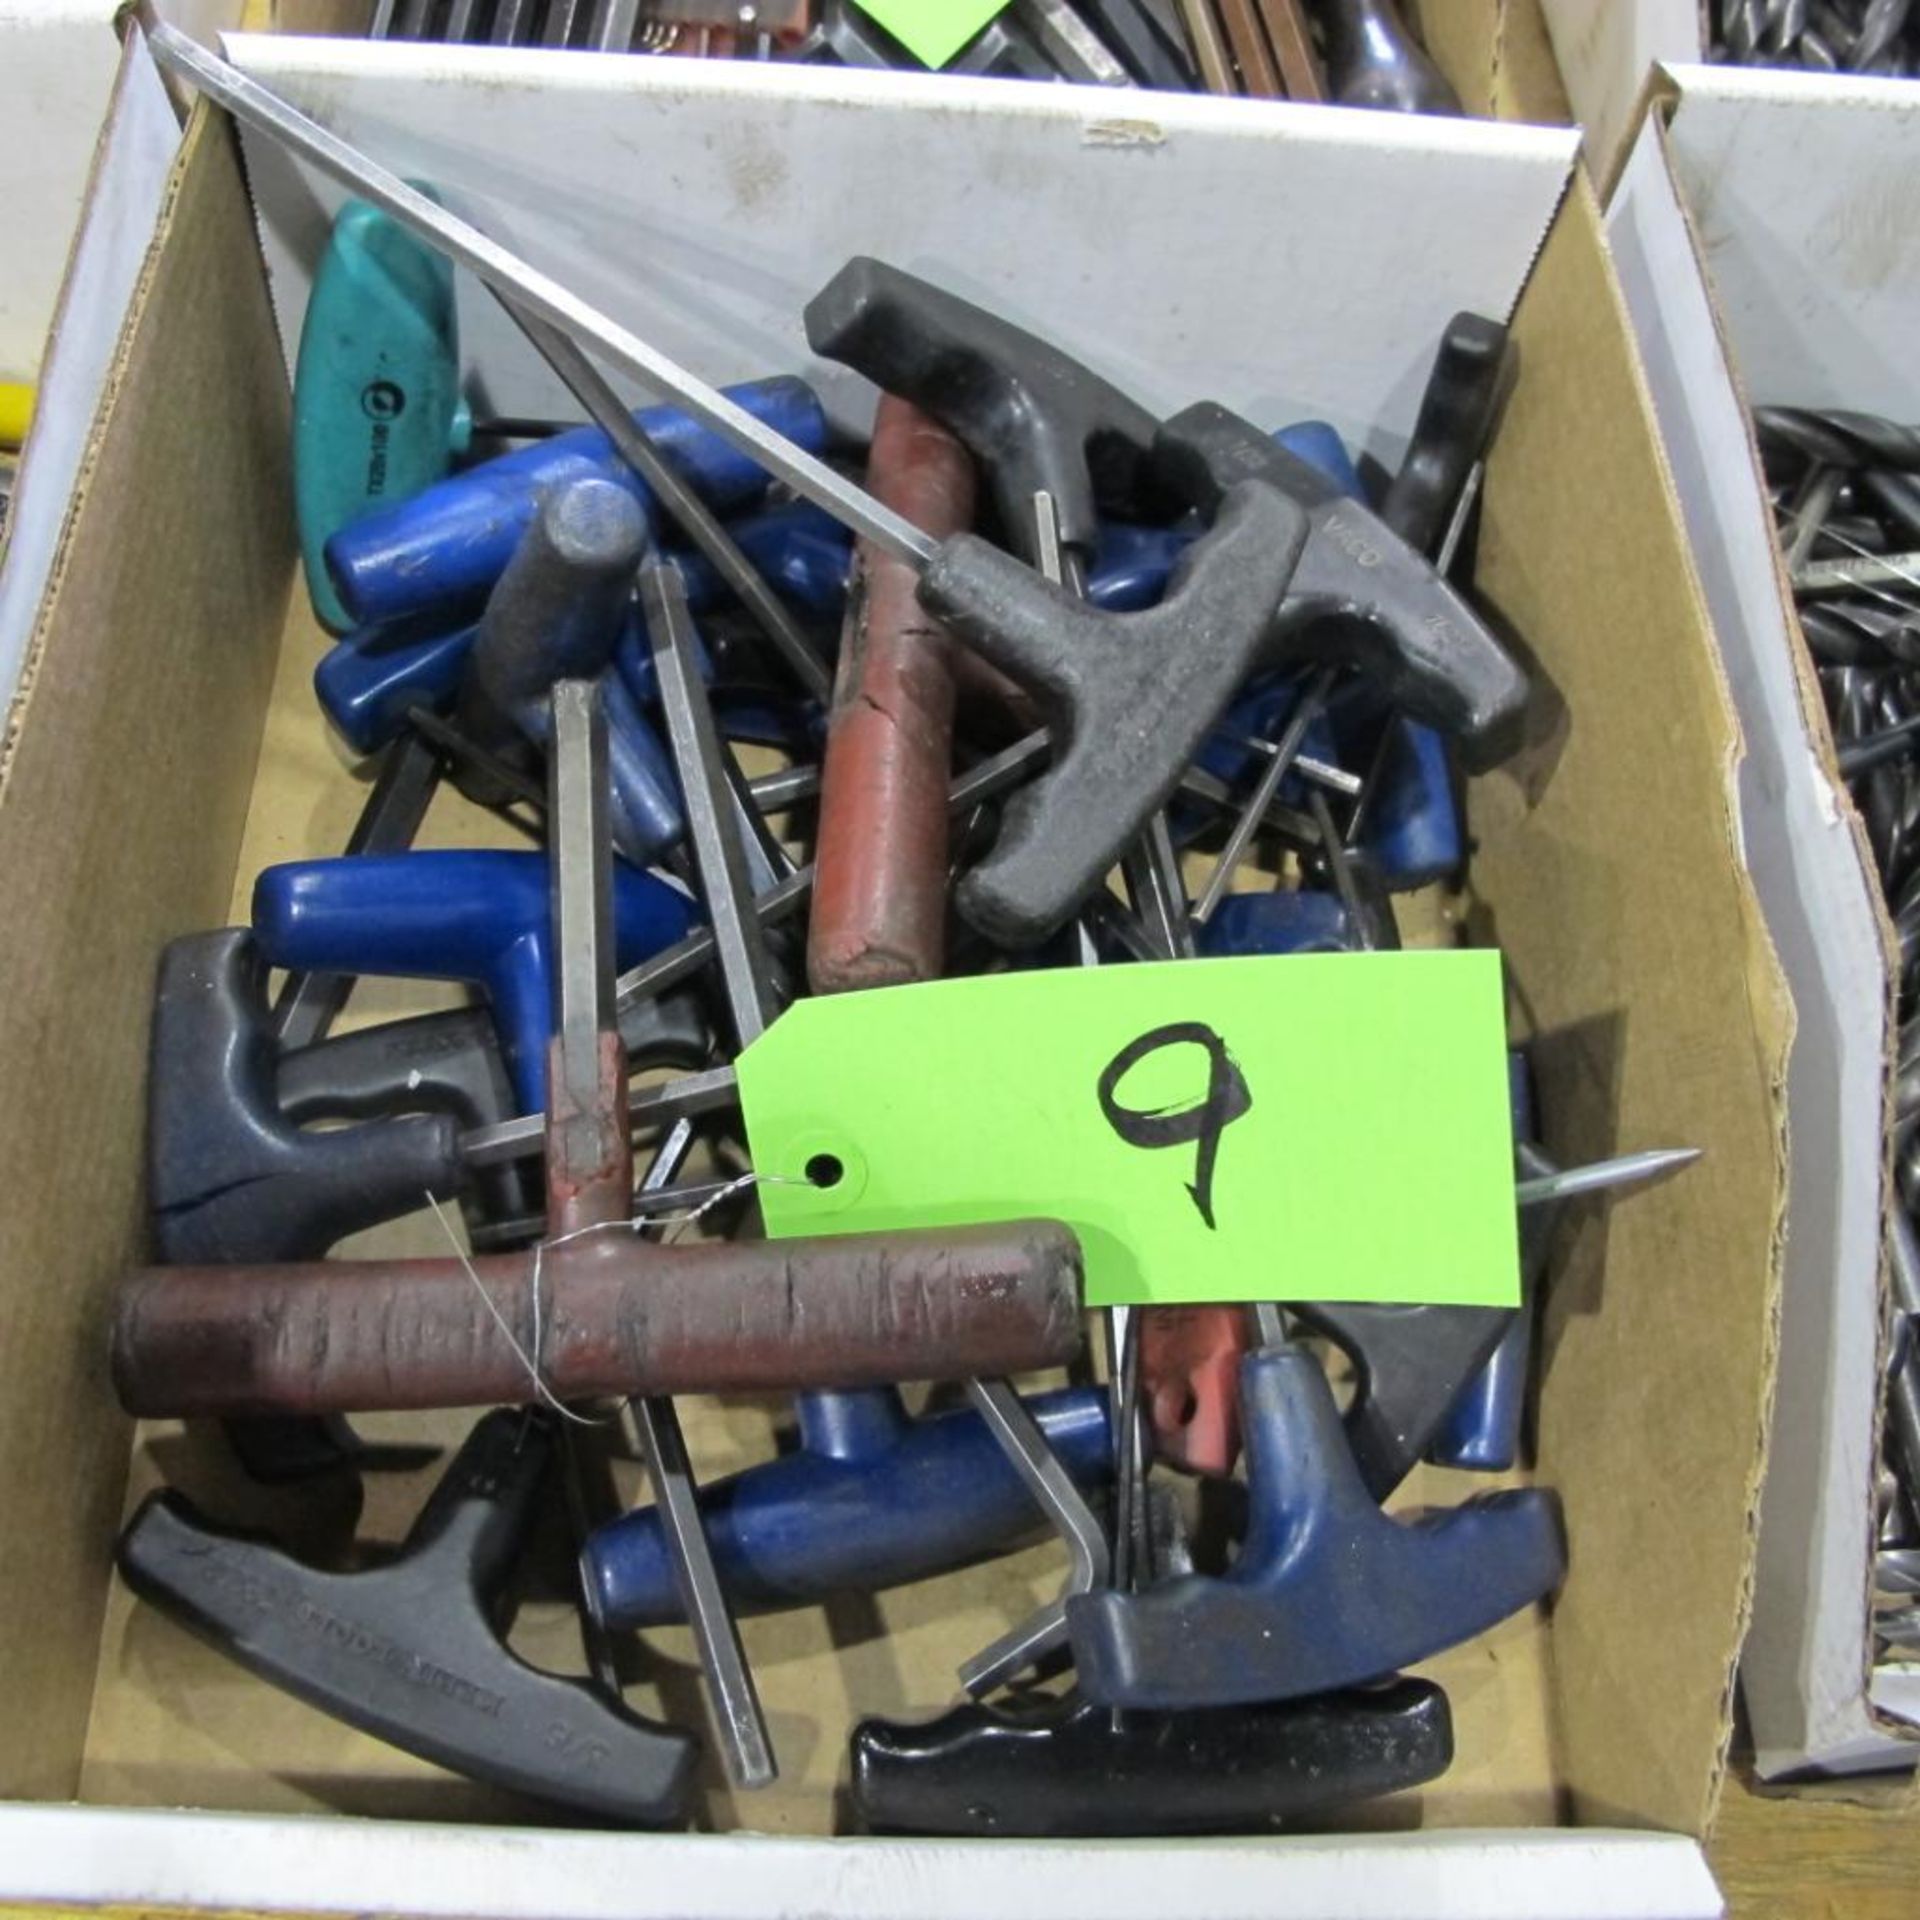 LOT OF 9 BOXES OF HAND TOOLS INCL ALLEN KEYS, FILES, HAMMERS/MALLETS, CUTTERS, CRESCENT WRENCHES DRI - Image 8 of 10